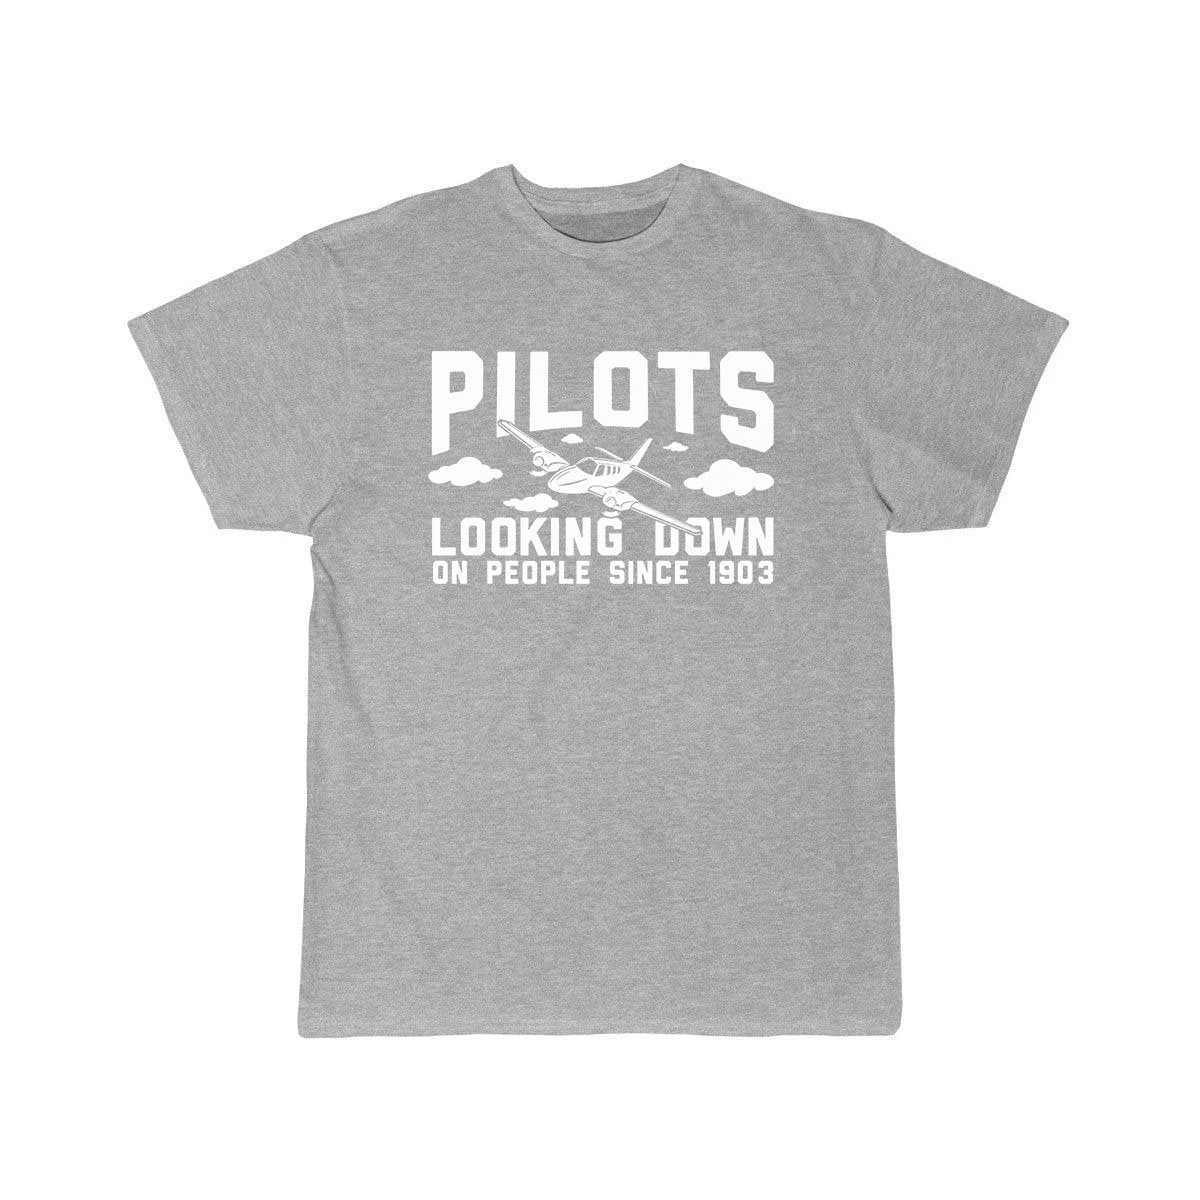 PILOTS LOOKING DOWN ON PEOPLE SINCE 1903 ESSENTIAL T-SHIRT THE AV8R